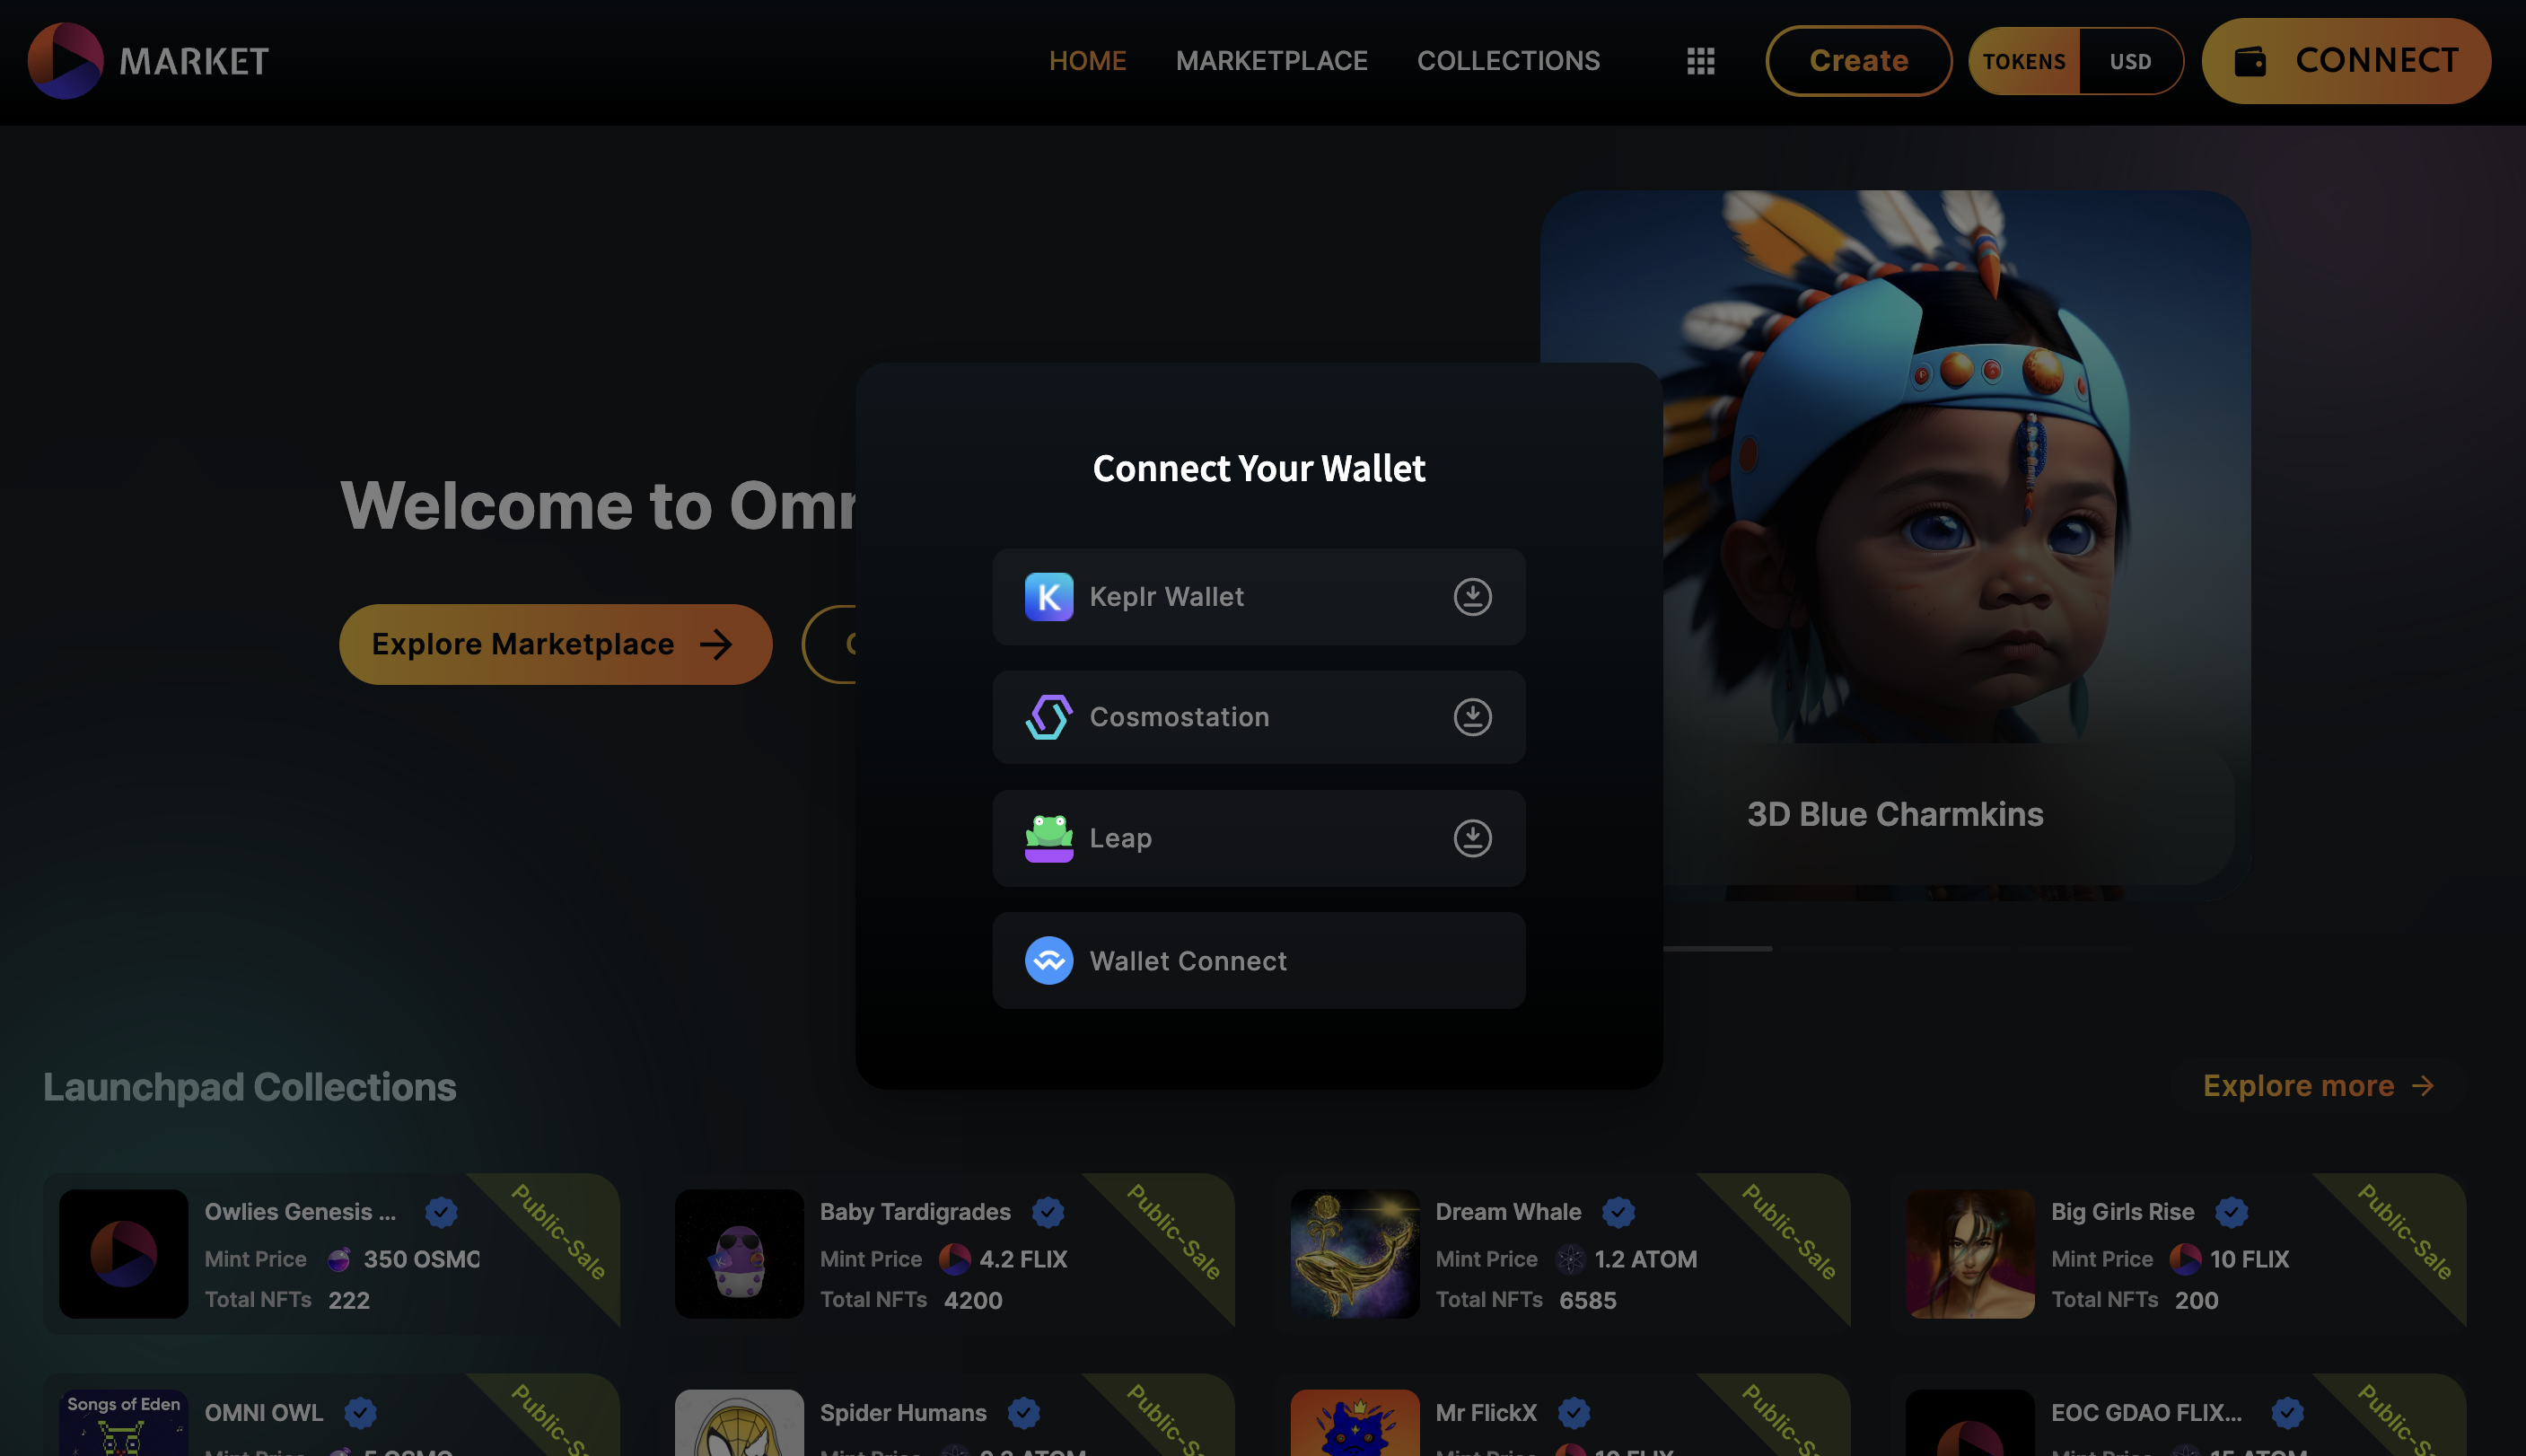 OmniFlix.Market - Now sign in to you account using Leap wallet